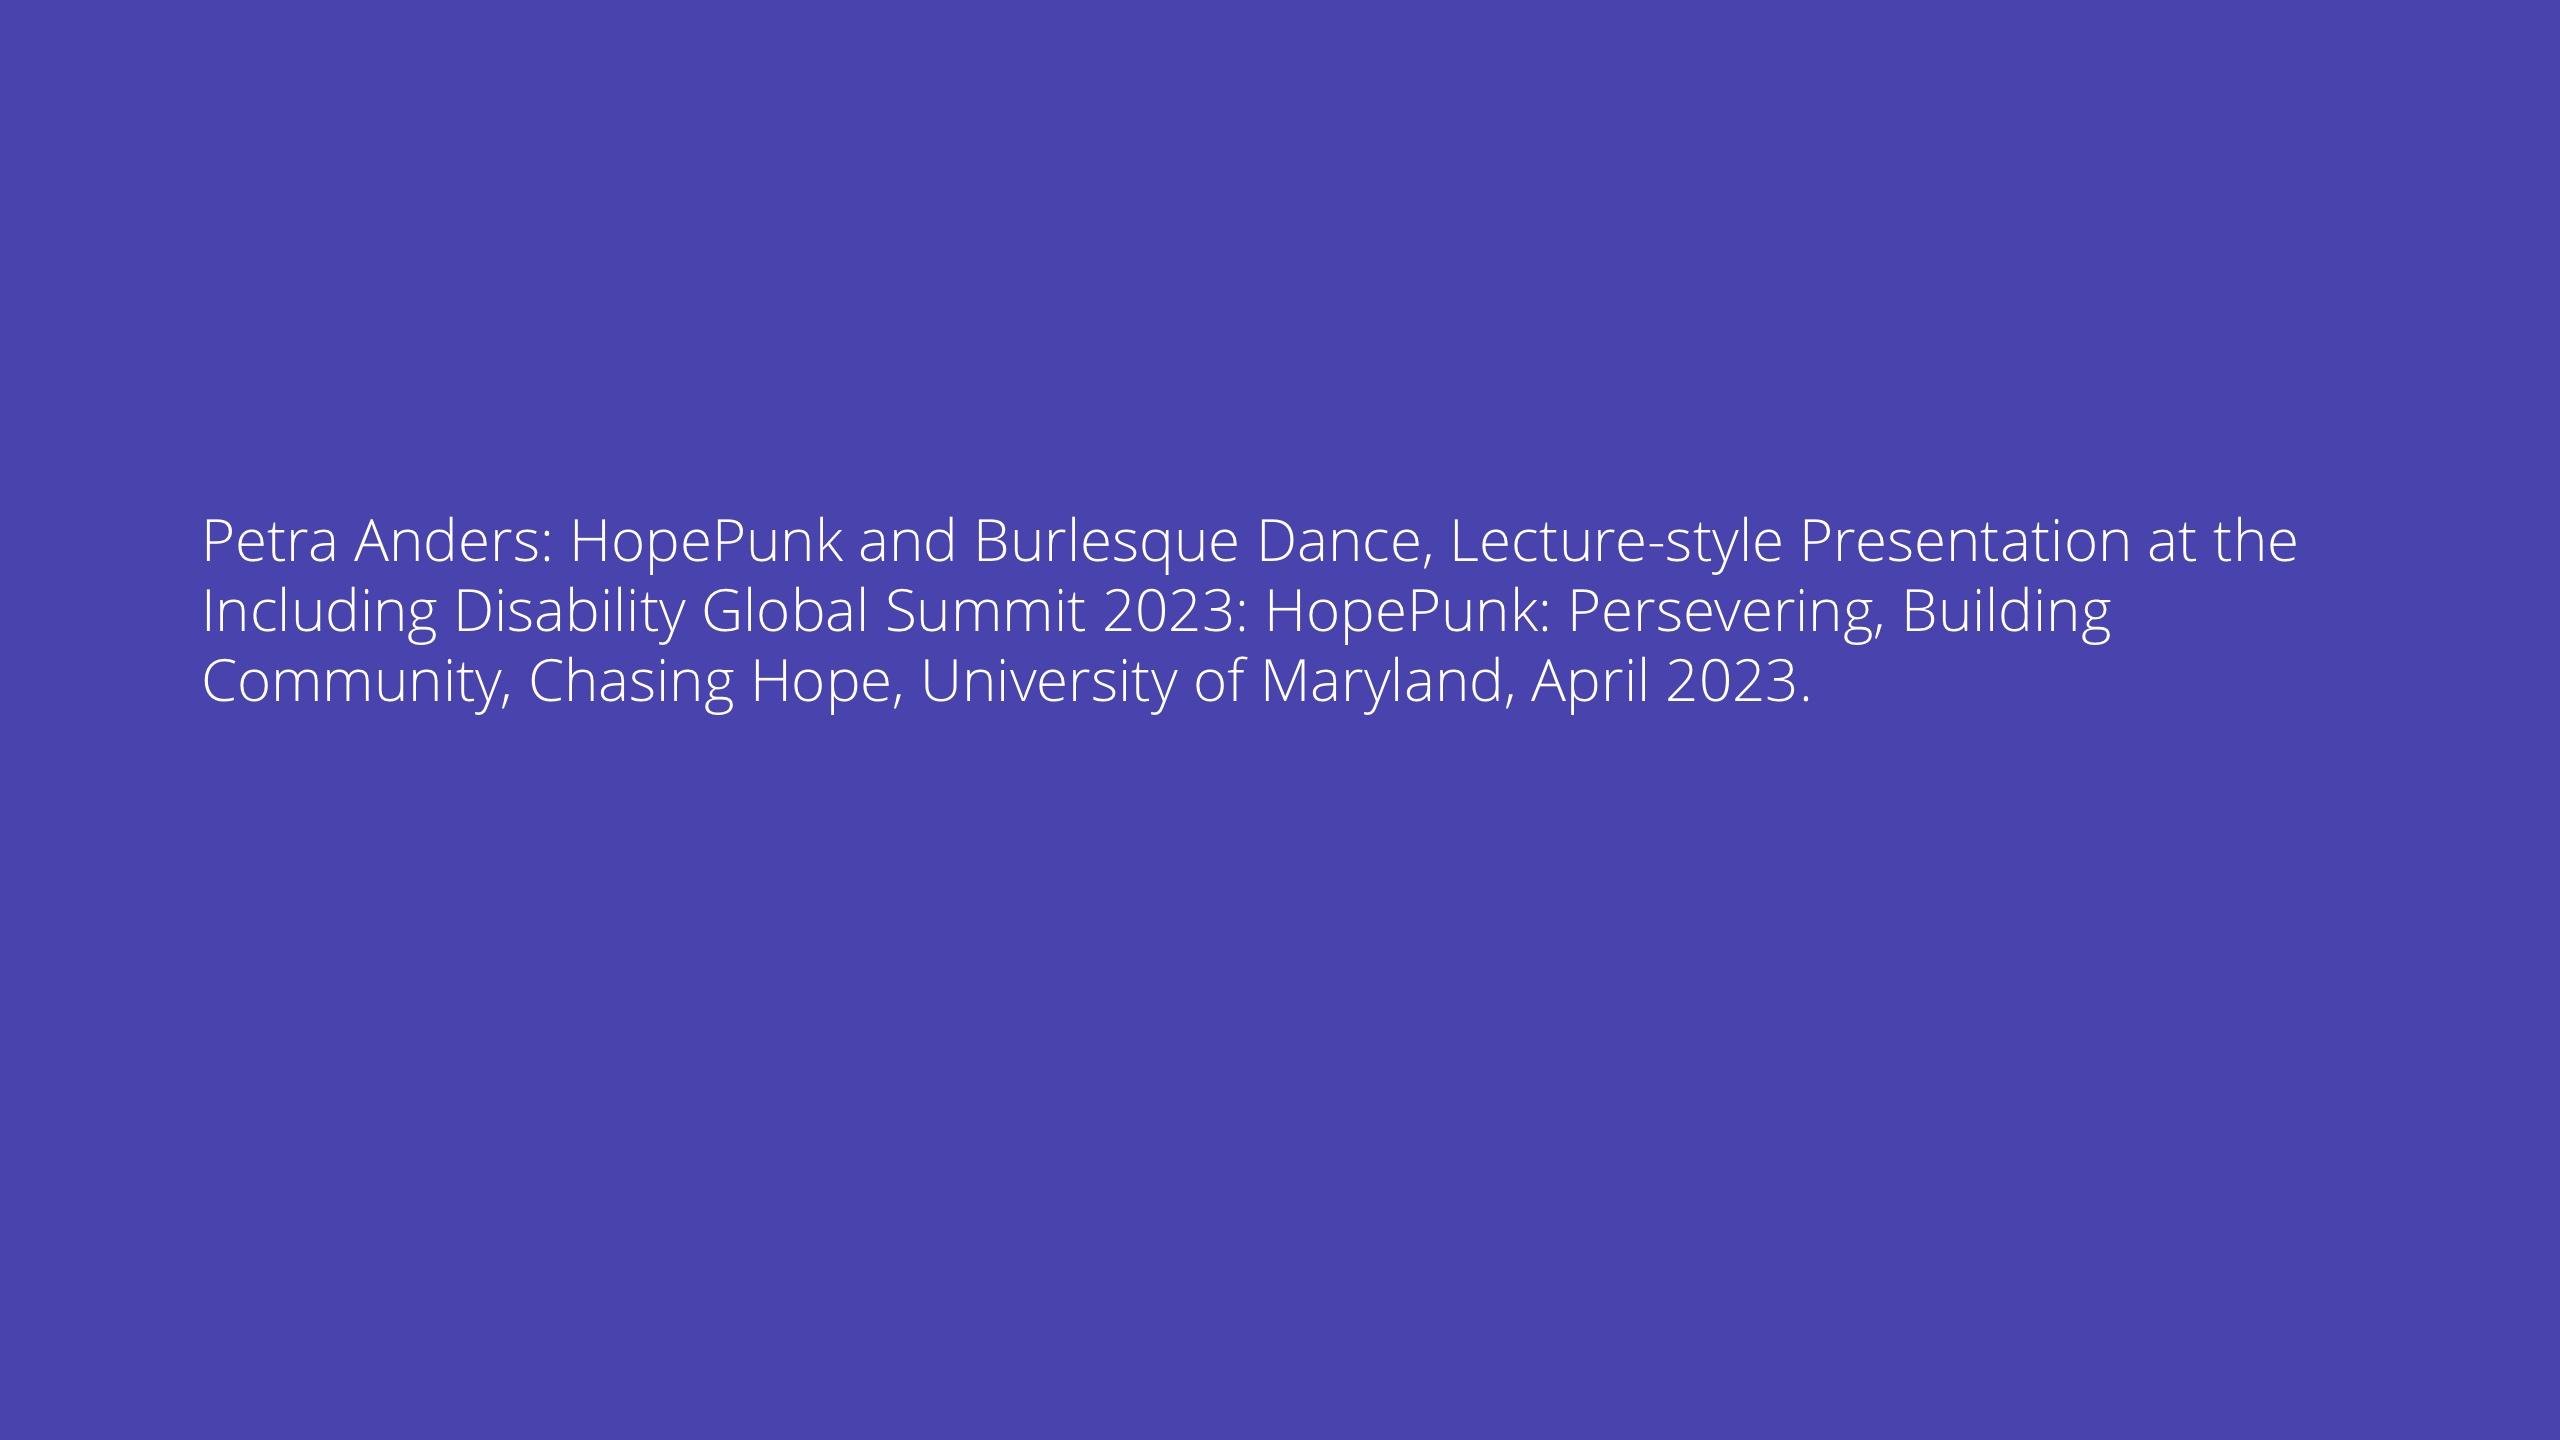 Petra Anders: HopePunk and Burlesque Dance, Lecture-style Presentation at the Including Disability Global Summit 2023: HopePunk: Persevering, Building Community, Chasing Hope, University of Maryland, April 2023.